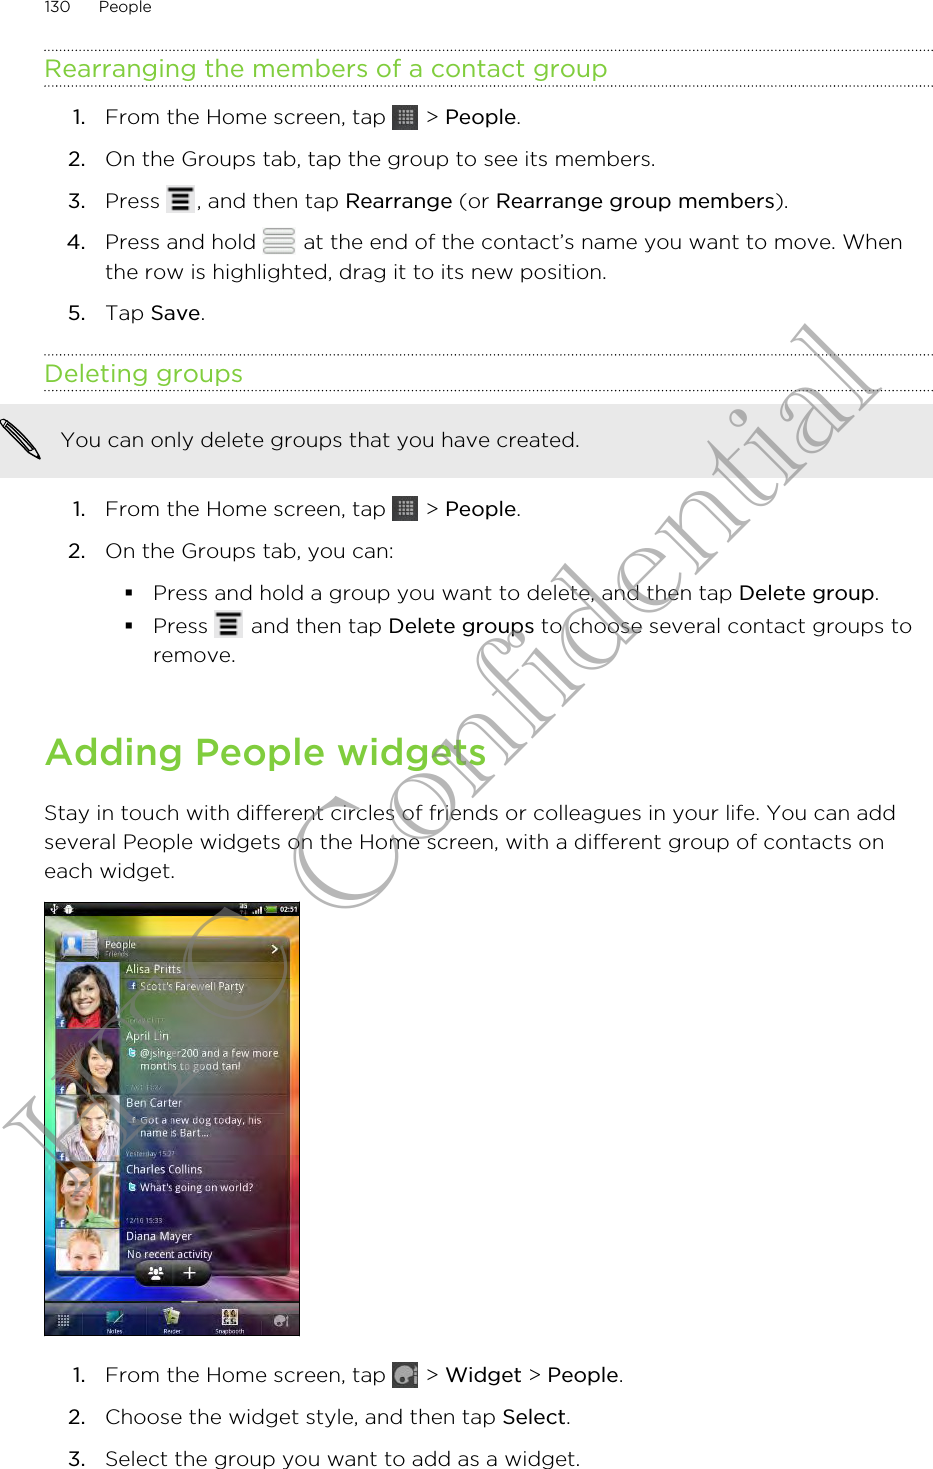 Rearranging the members of a contact group1. From the Home screen, tap   &gt; People.2. On the Groups tab, tap the group to see its members.3. Press  , and then tap Rearrange (or Rearrange group members).4. Press and hold   at the end of the contact’s name you want to move. Whenthe row is highlighted, drag it to its new position.5. Tap Save.Deleting groupsYou can only delete groups that you have created.1. From the Home screen, tap   &gt; People.2. On the Groups tab, you can:§Press and hold a group you want to delete, and then tap Delete group.§Press   and then tap Delete groups to choose several contact groups toremove.Adding People widgetsStay in touch with different circles of friends or colleagues in your life. You can addseveral People widgets on the Home screen, with a different group of contacts oneach widget.1. From the Home screen, tap   &gt; Widget &gt; People.2. Choose the widget style, and then tap Select.3. Select the group you want to add as a widget.130 PeopleHTC Confidential